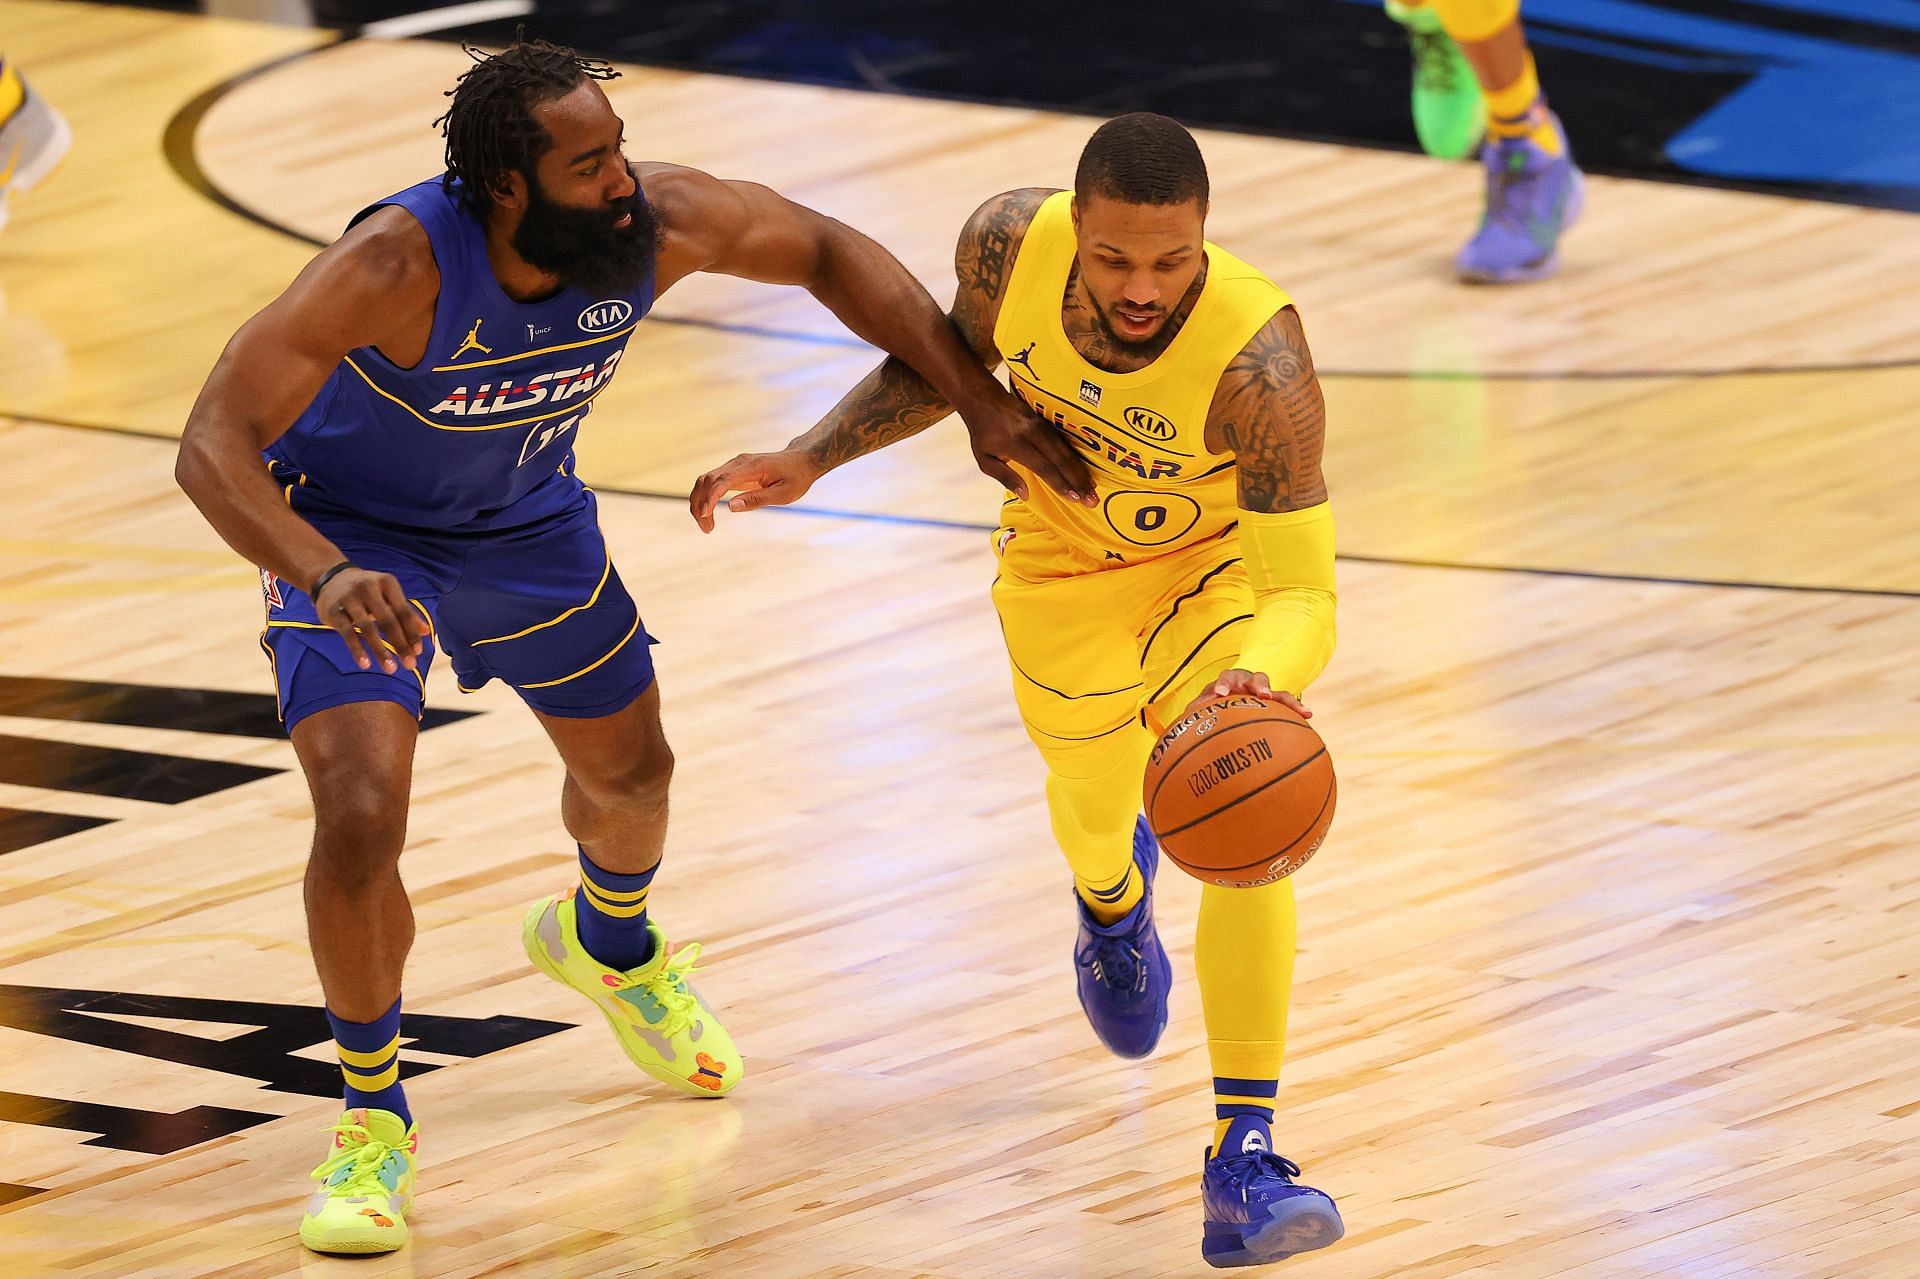 James Harden (left) and Damian Lillard (right) at the 2021 NBA All-Star Game